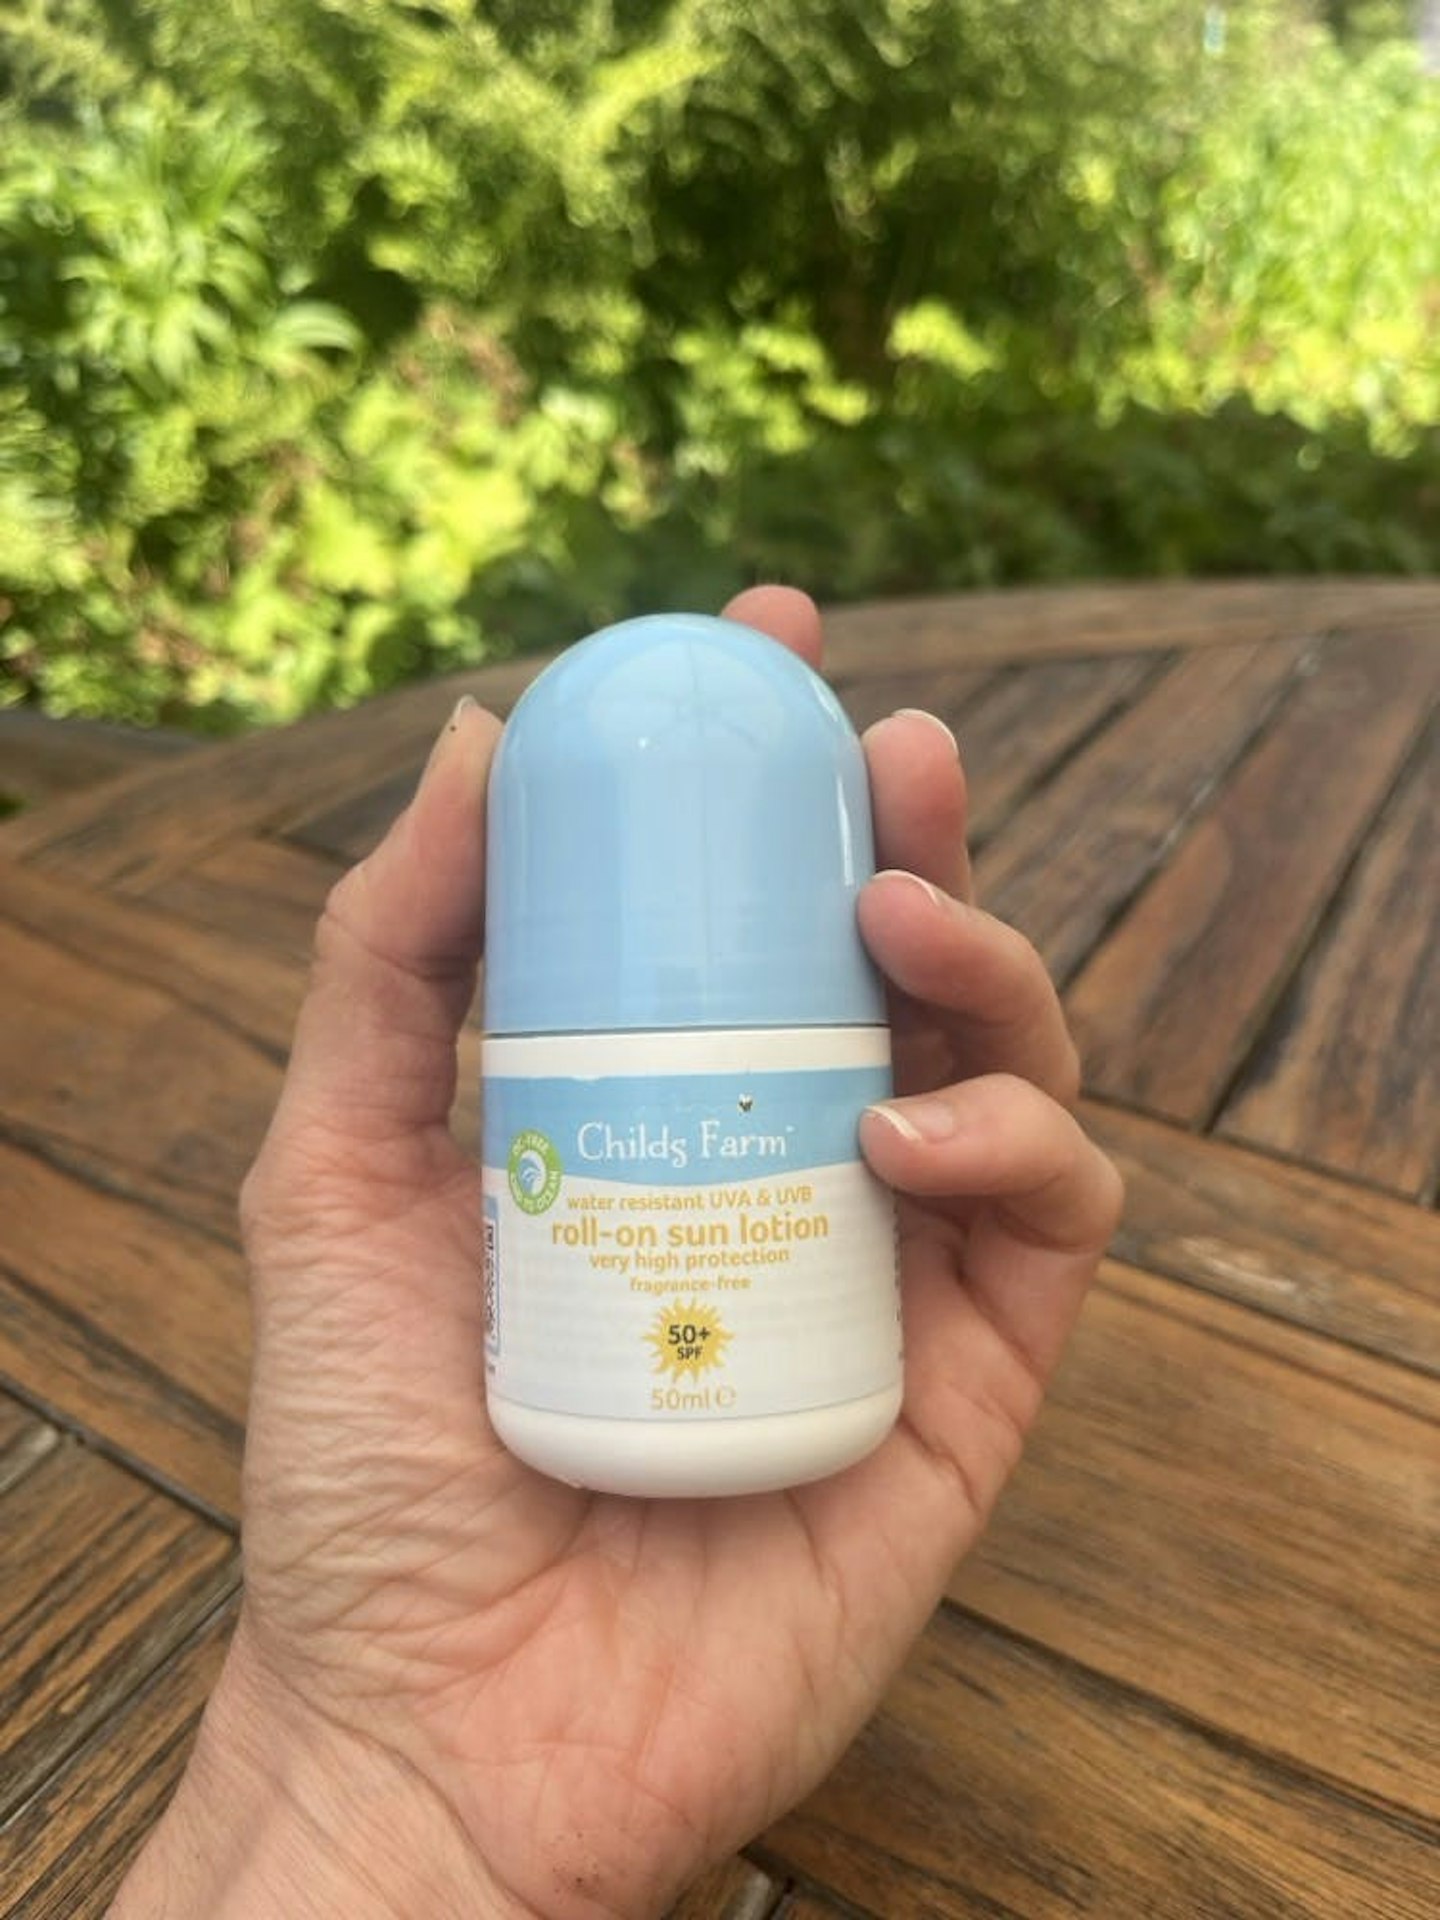 Childs Farm 50+SPF Roll-On Sun Lotion Fragrance Free